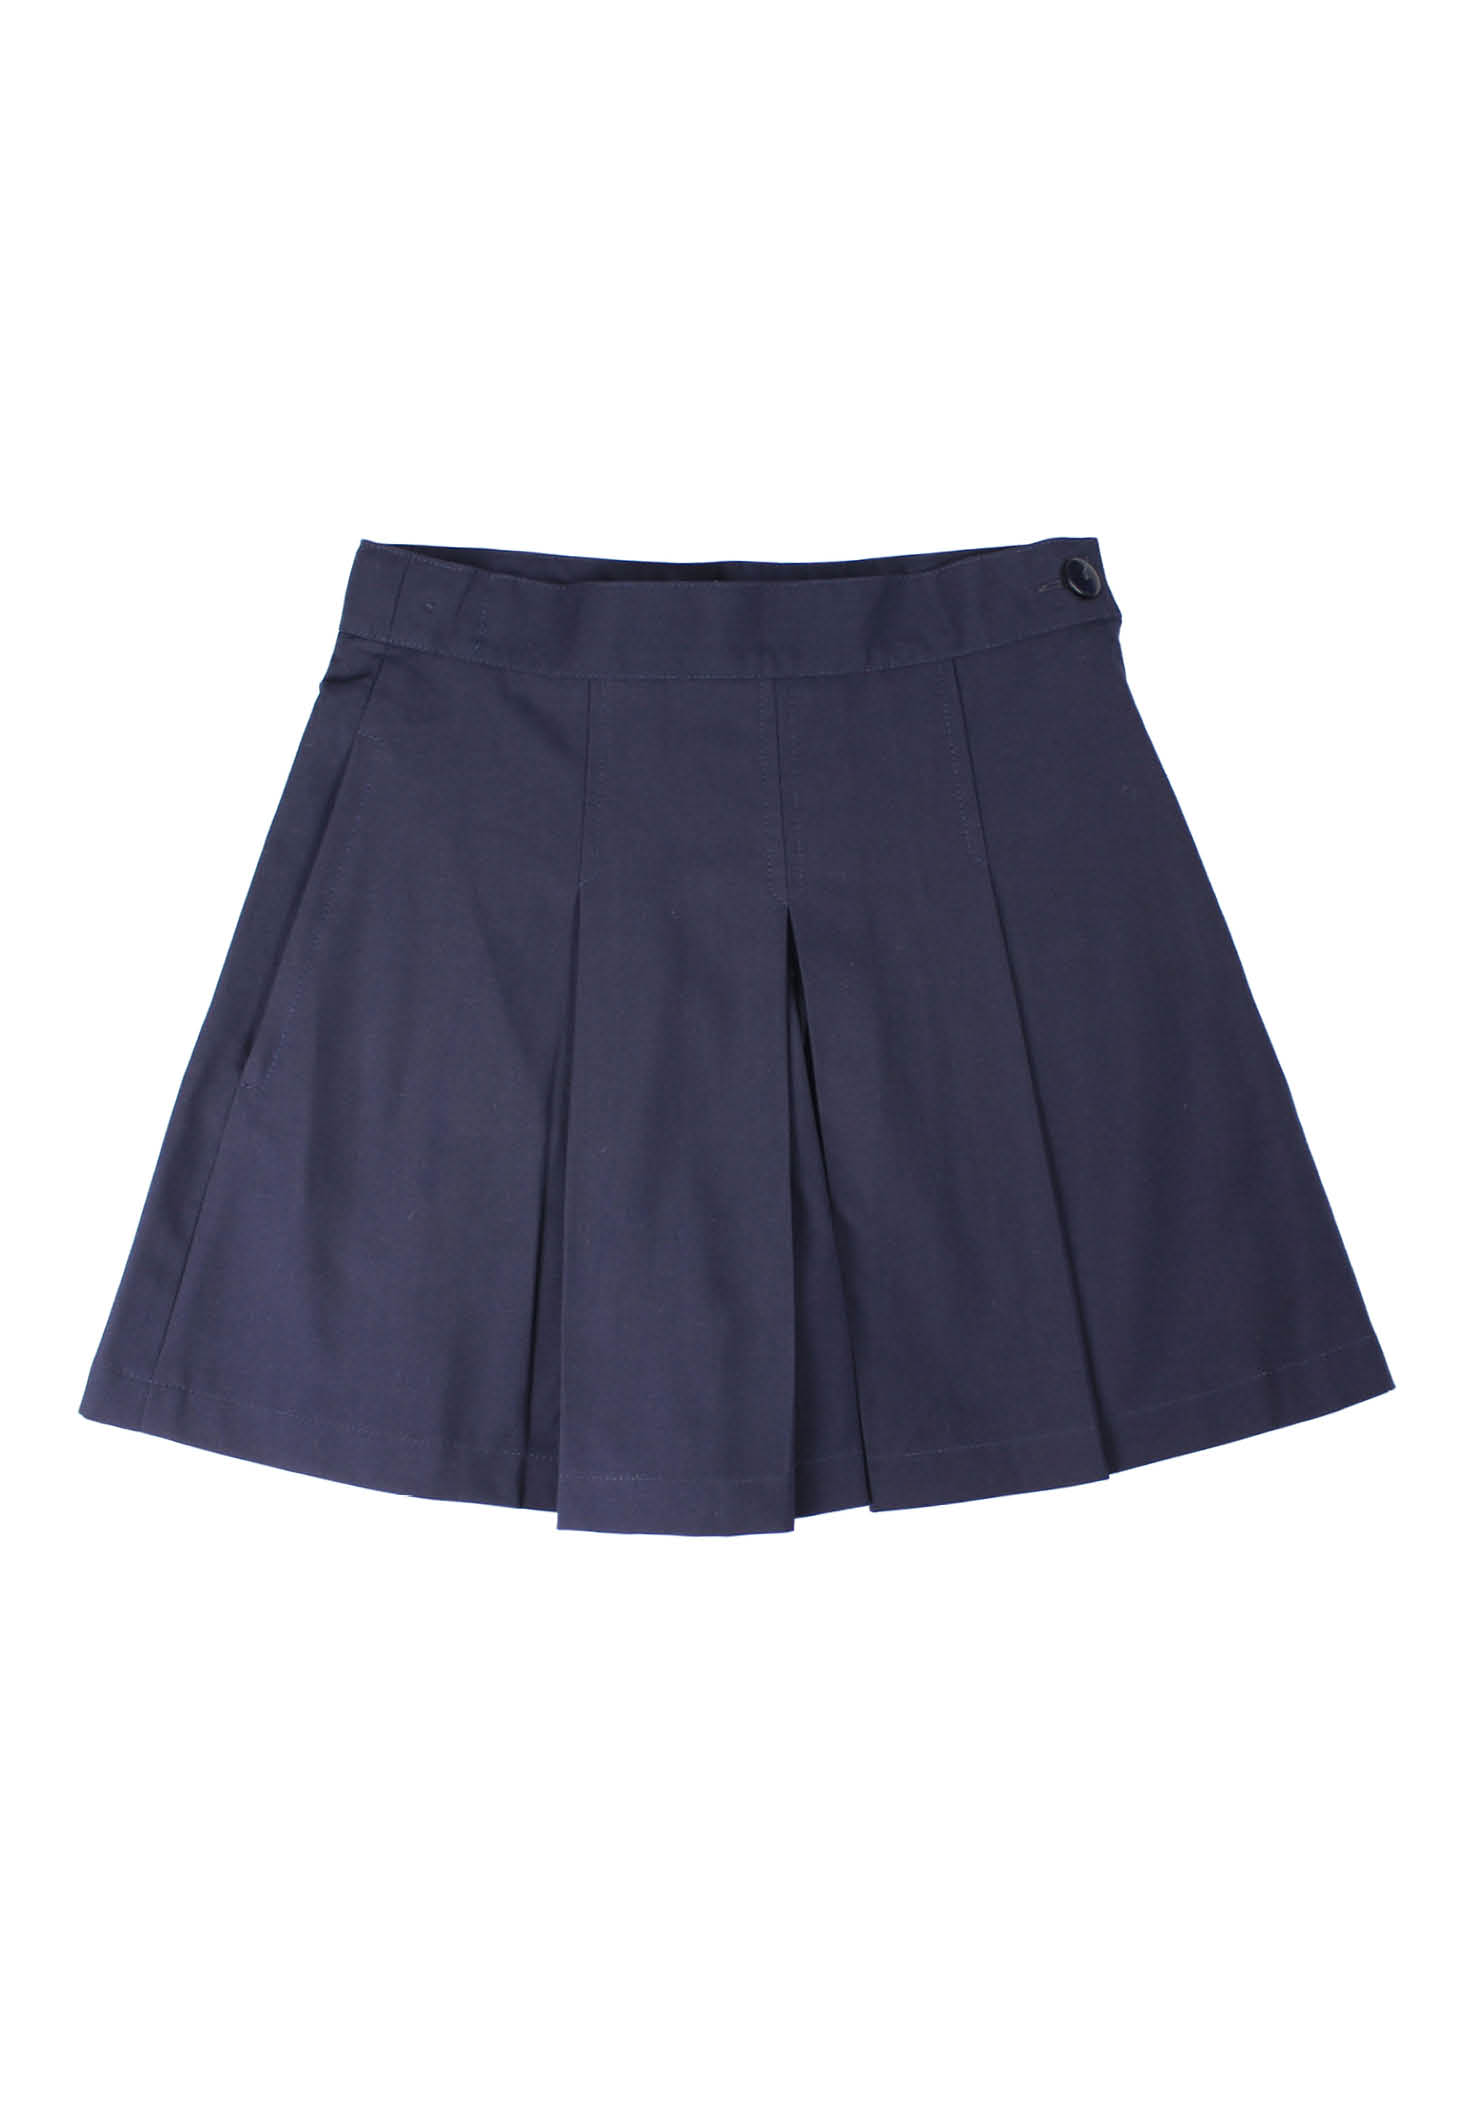 Stanmore Girls Culottes | Shop at Pickles Schoolwear | School Uniforms ...